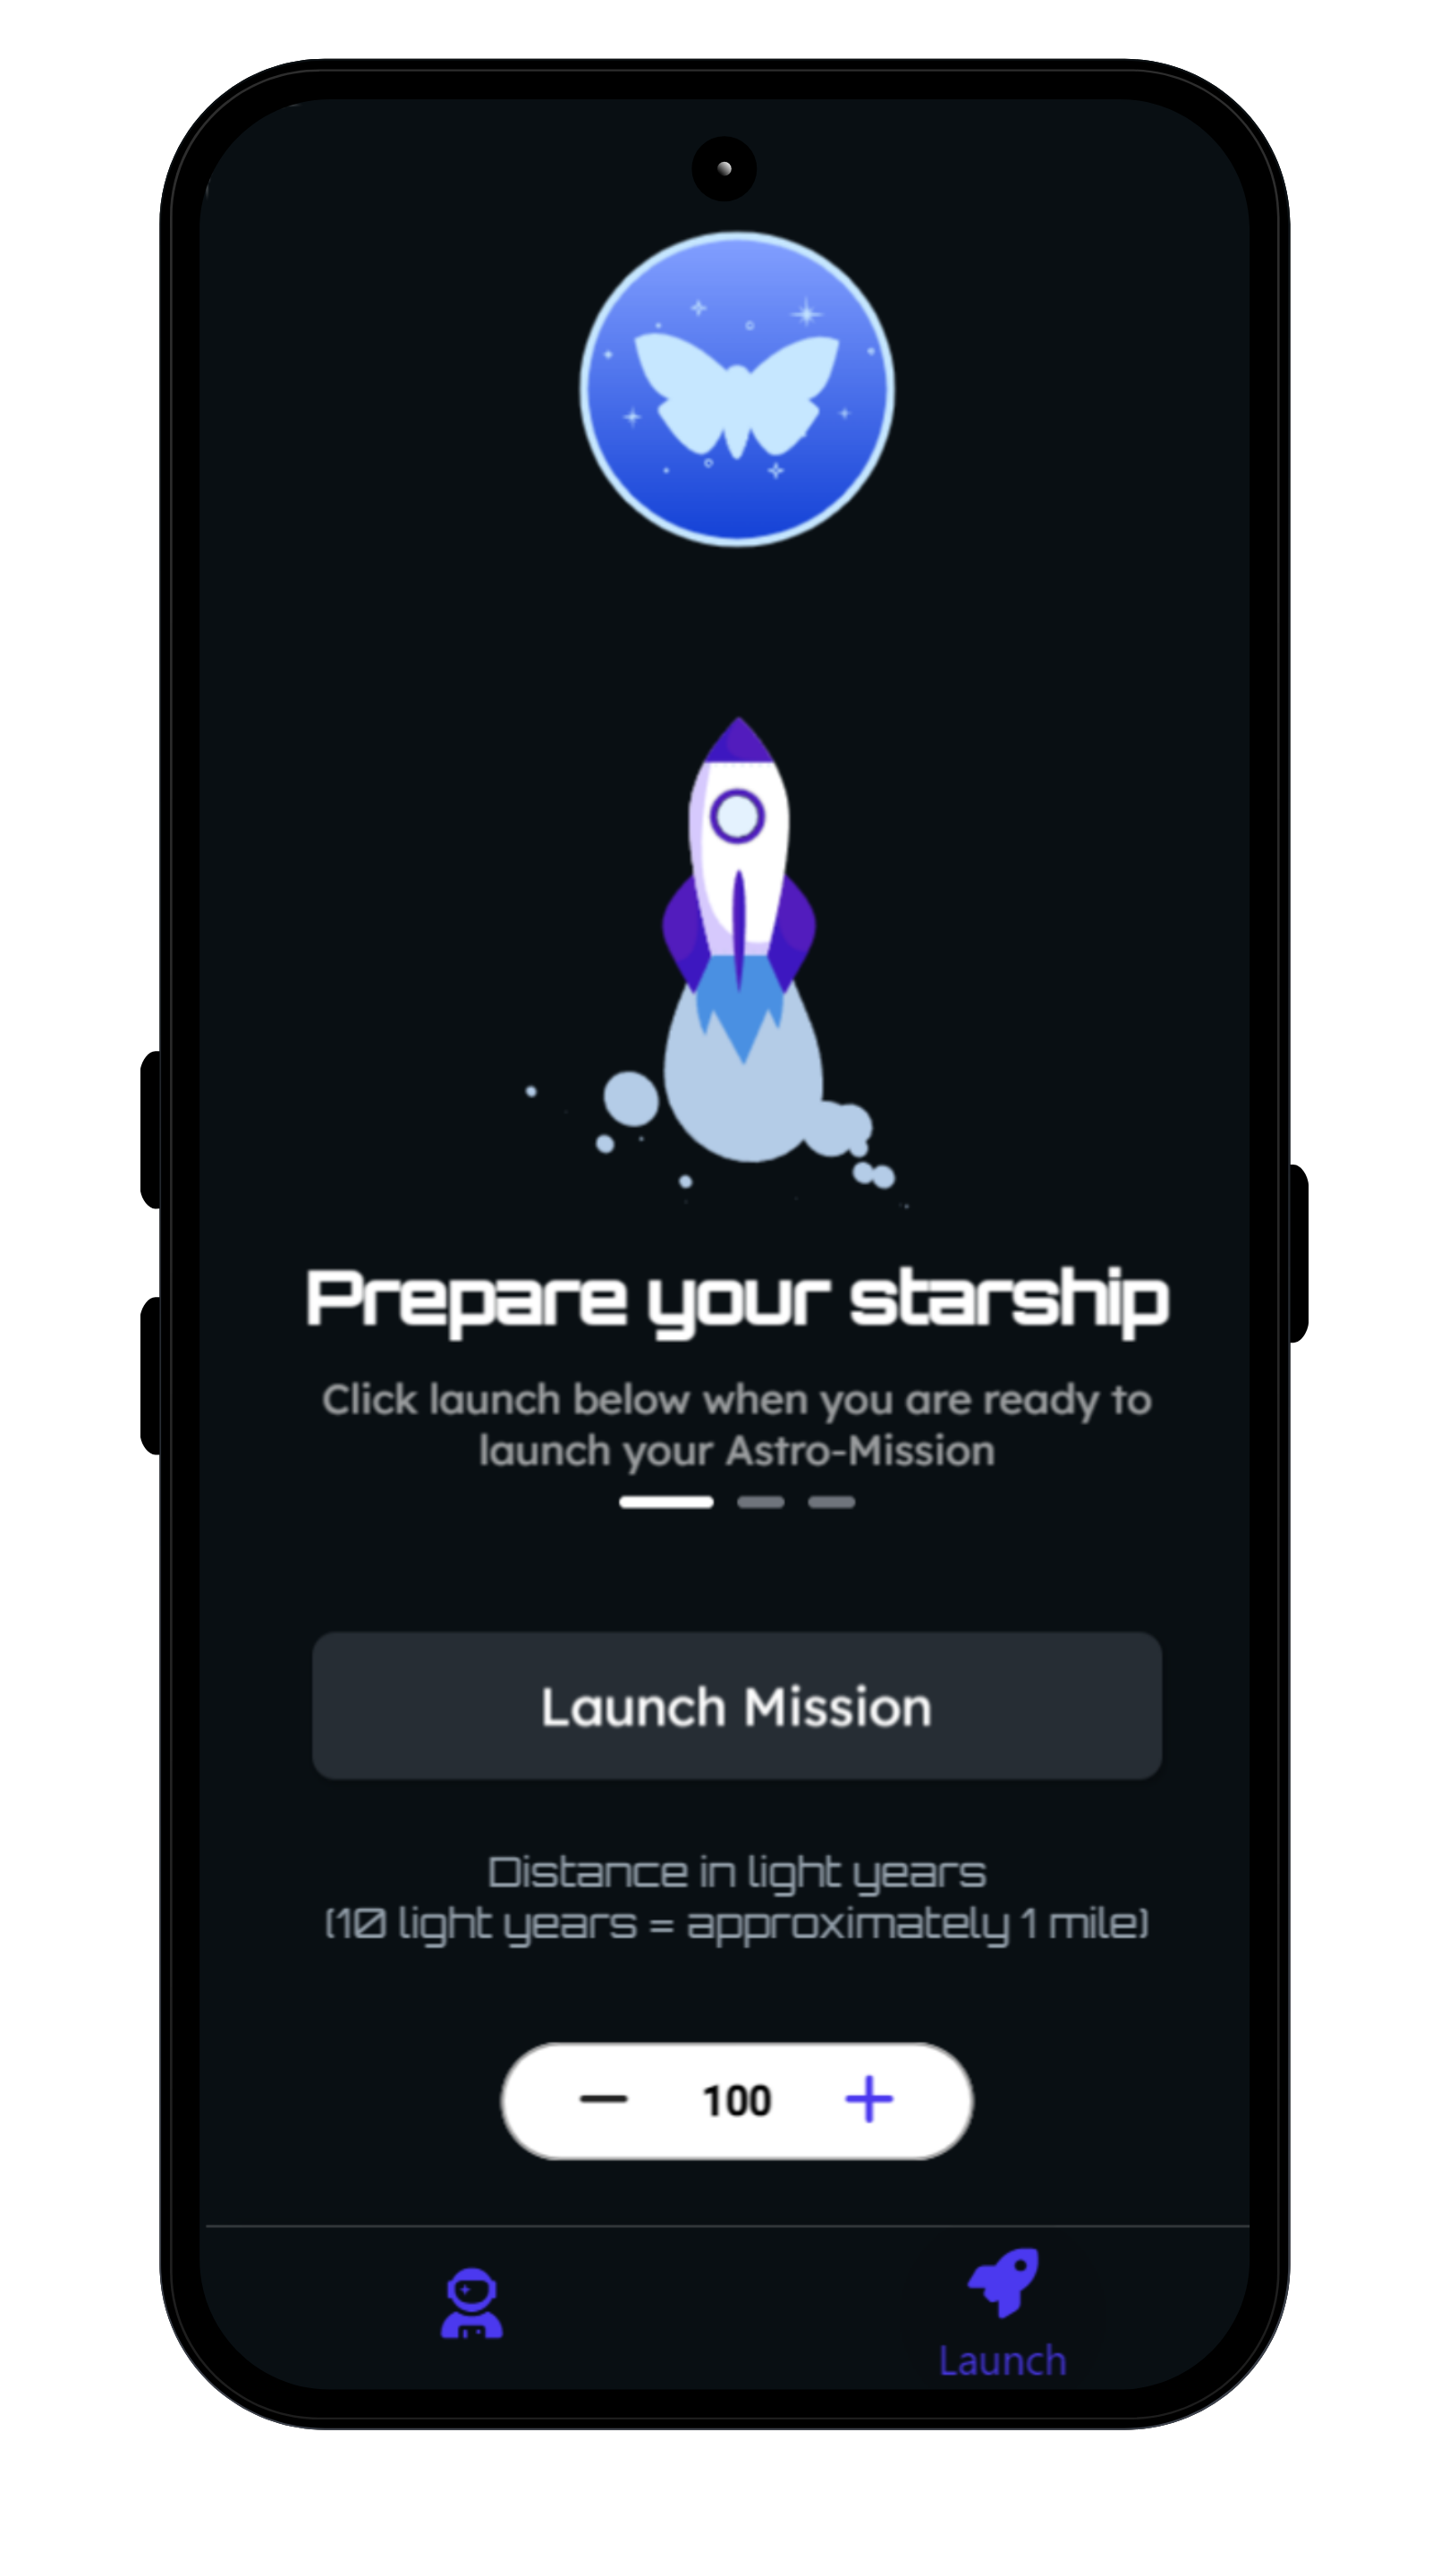 main launch screen of the app presented in an android mockup